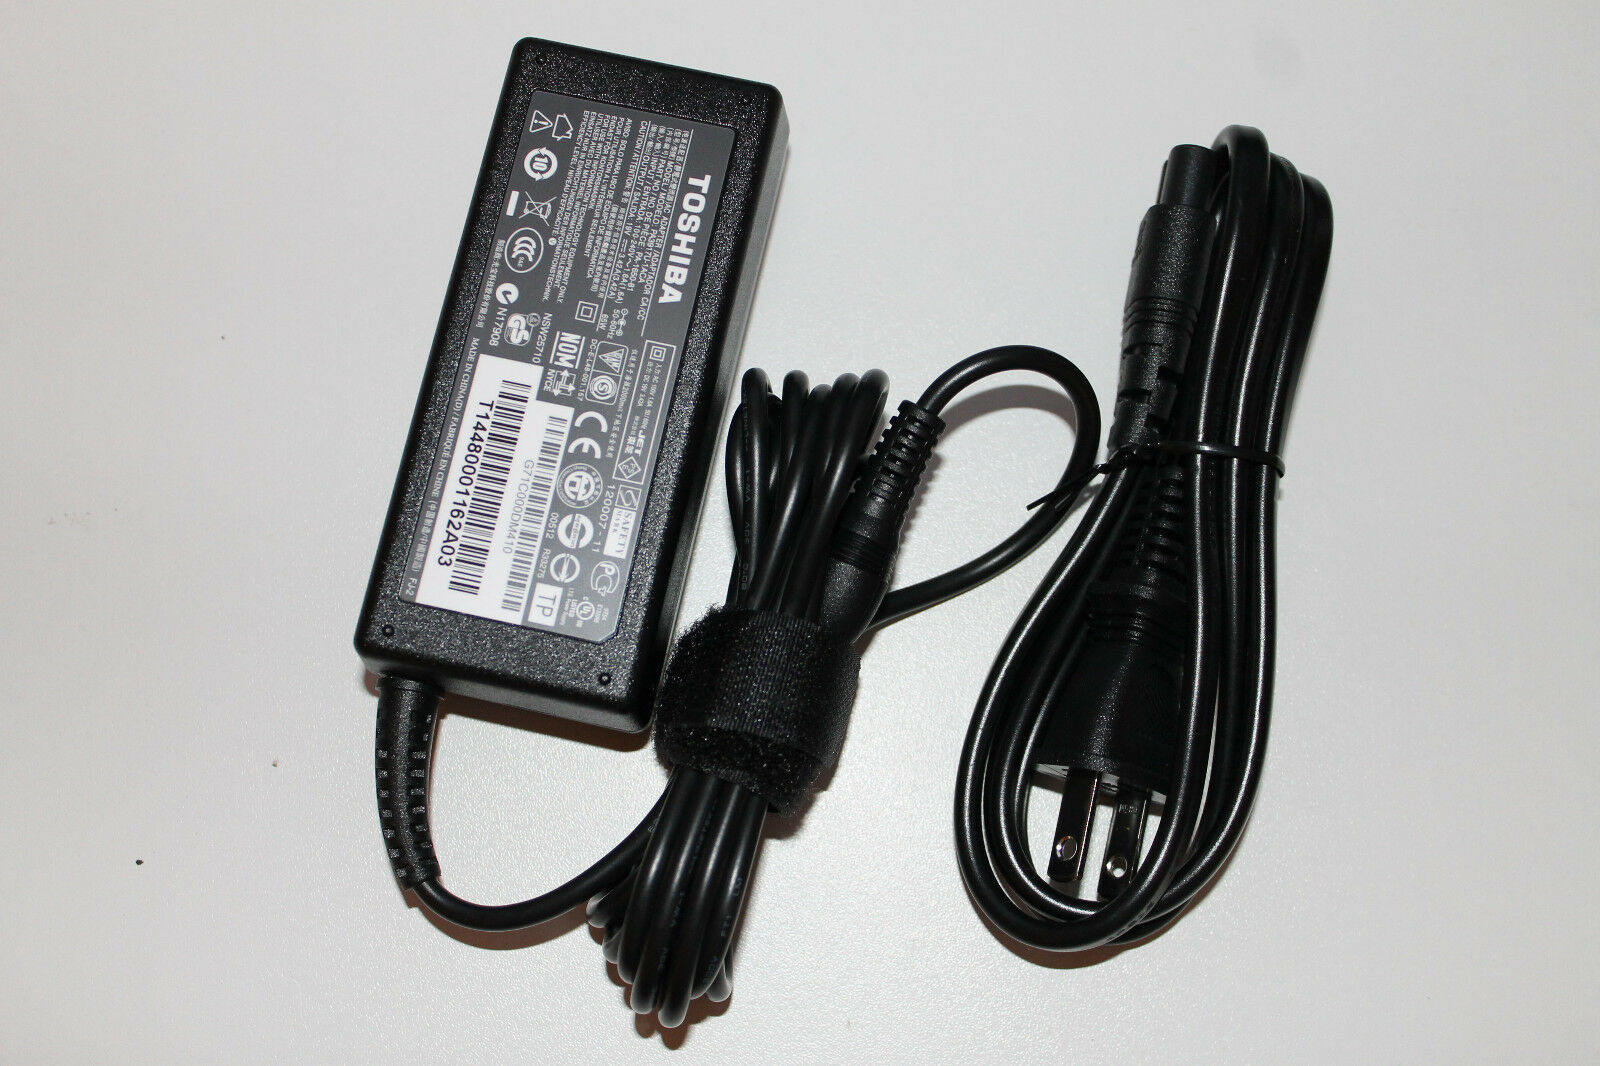 Toshiba R705-SP3002M Portege Ac Adapter Power Supply Cord Cable Charger Genuine Original